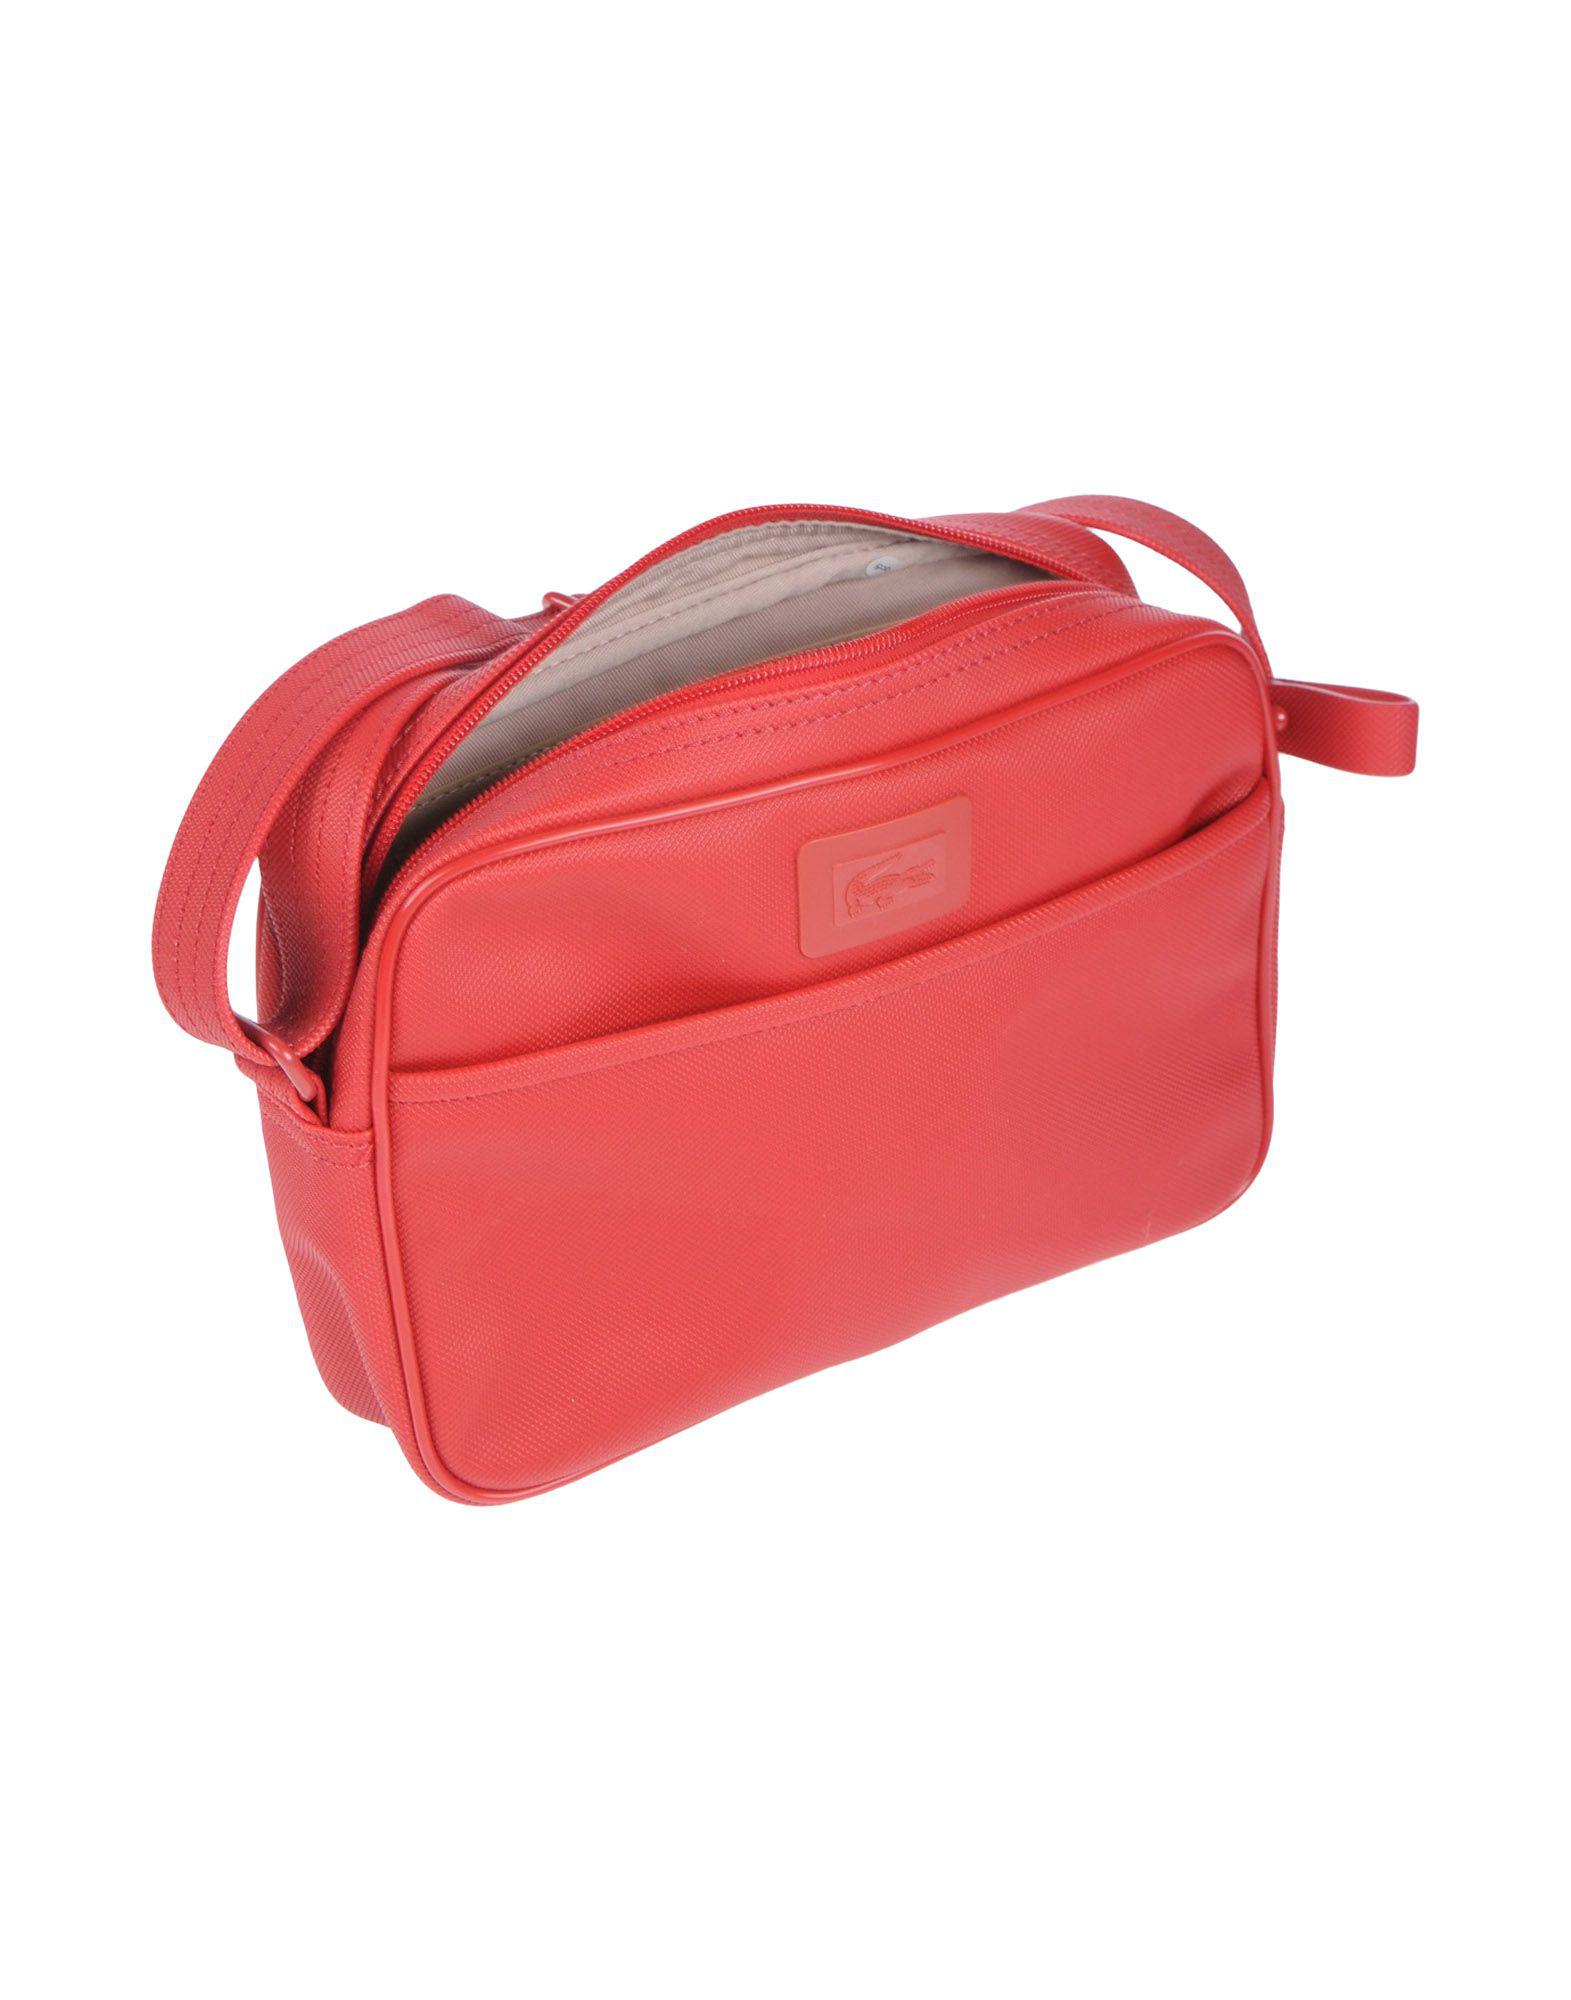 lacoste sling bag red